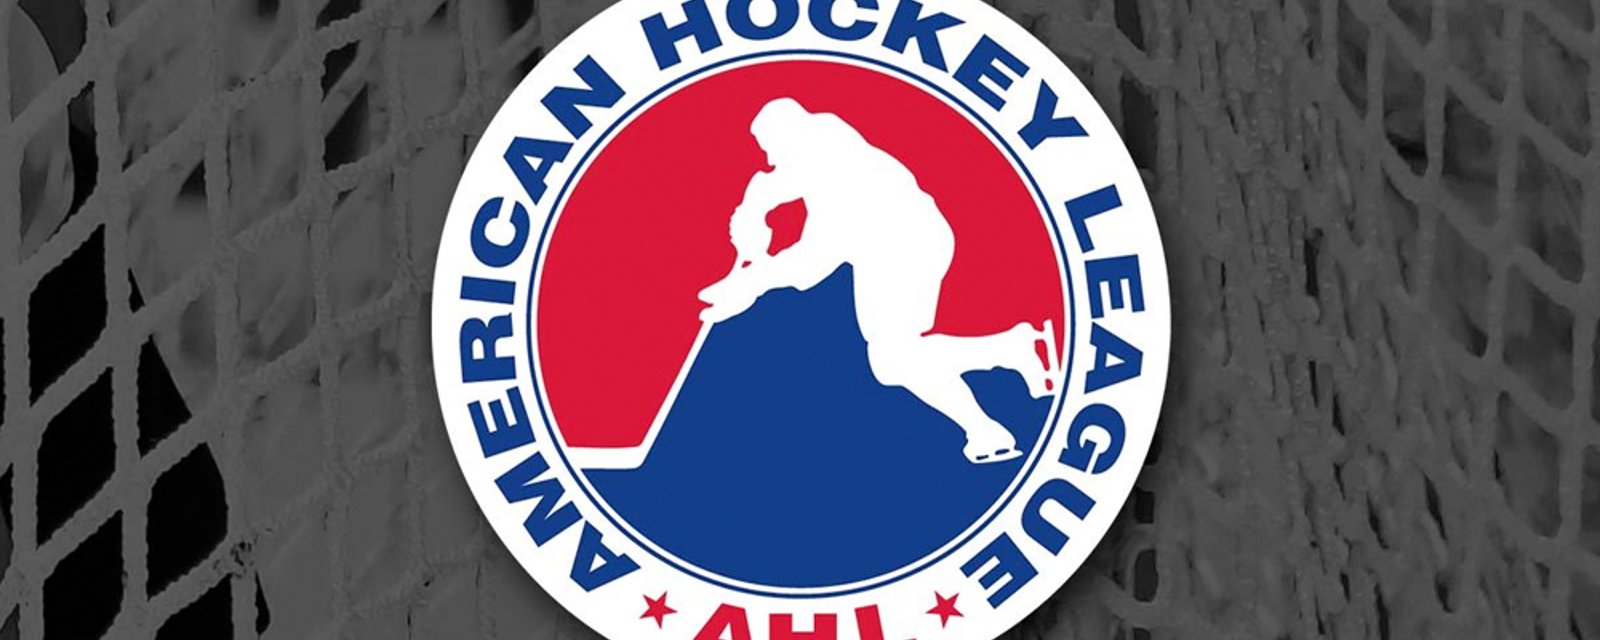 Canada officially gets a 5th AHL team